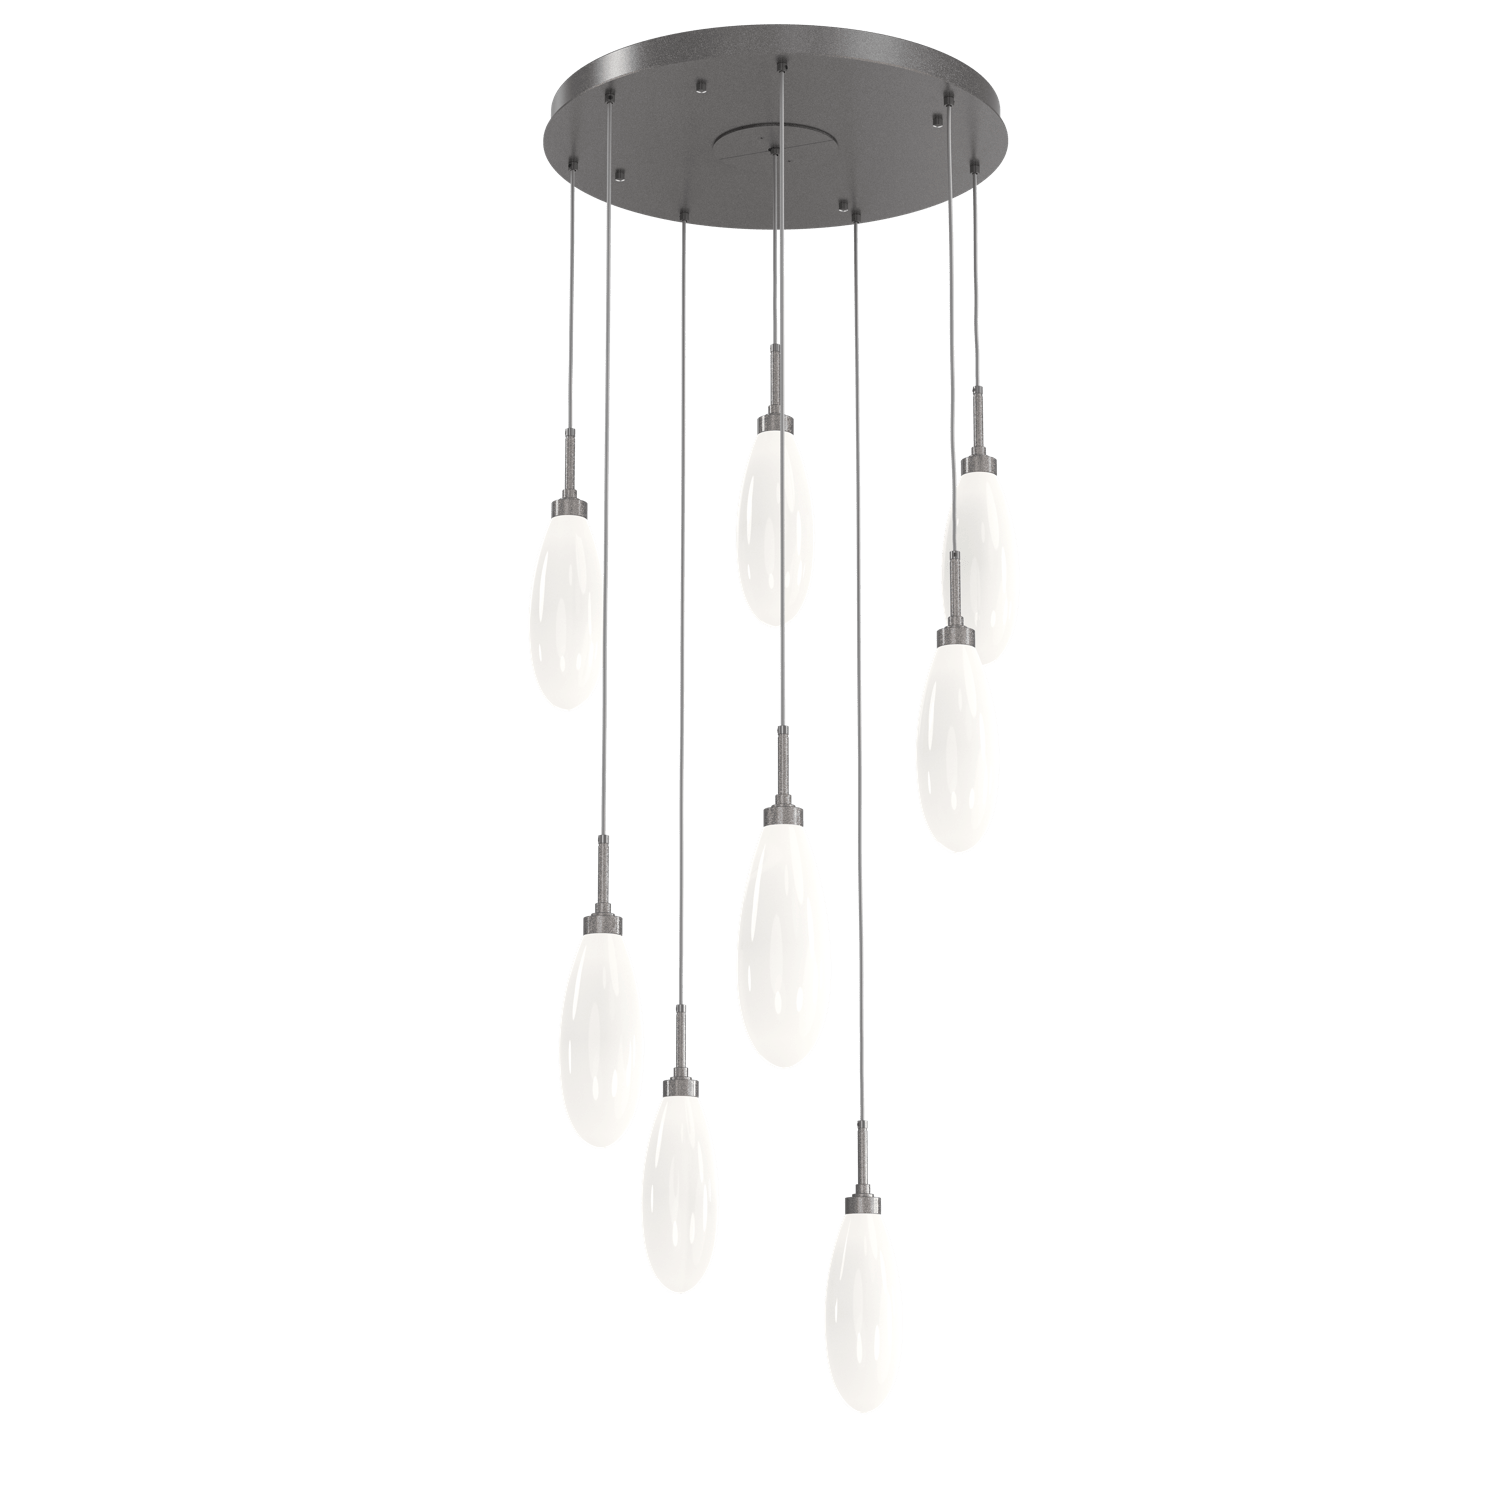 CHB0071-08-GP-WL-LL-Hammerton-Studio-Fiori-8-light-round-pendant-chandelier-with-graphite-finish-and-opal-white-glass-shades-and-LED-lamping